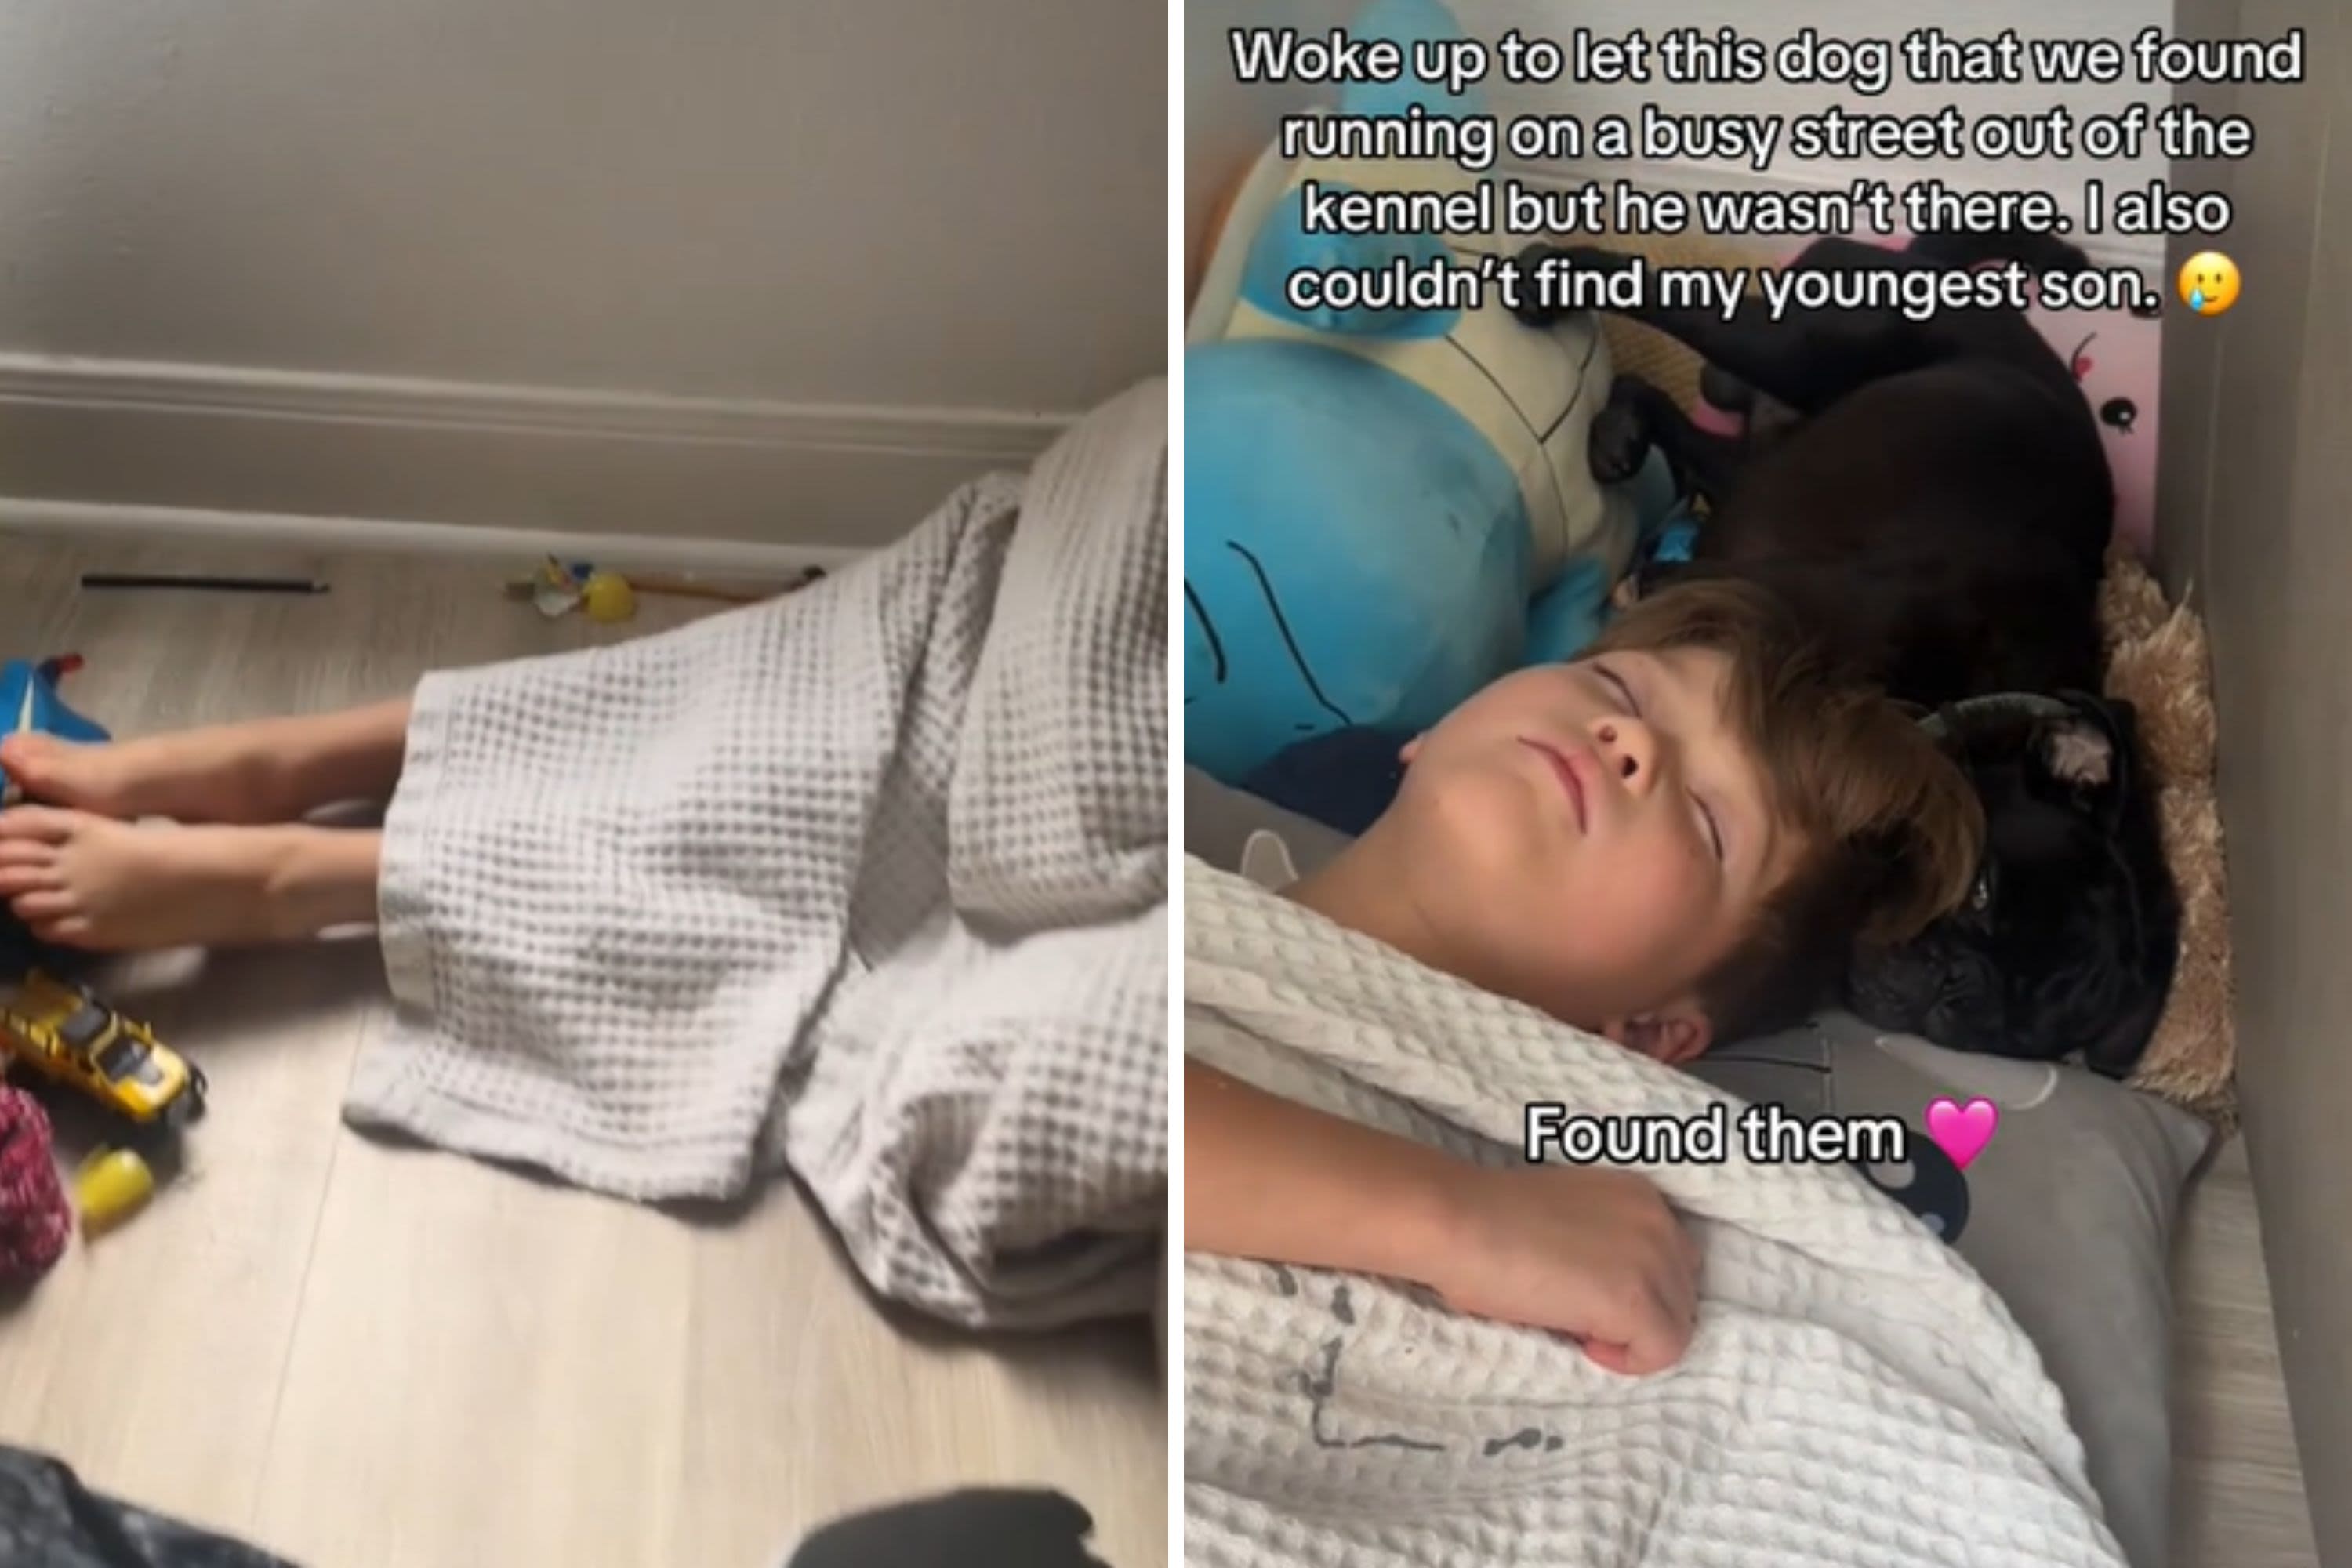 Mom not prepared for where she finds son morning after they rescue a dog